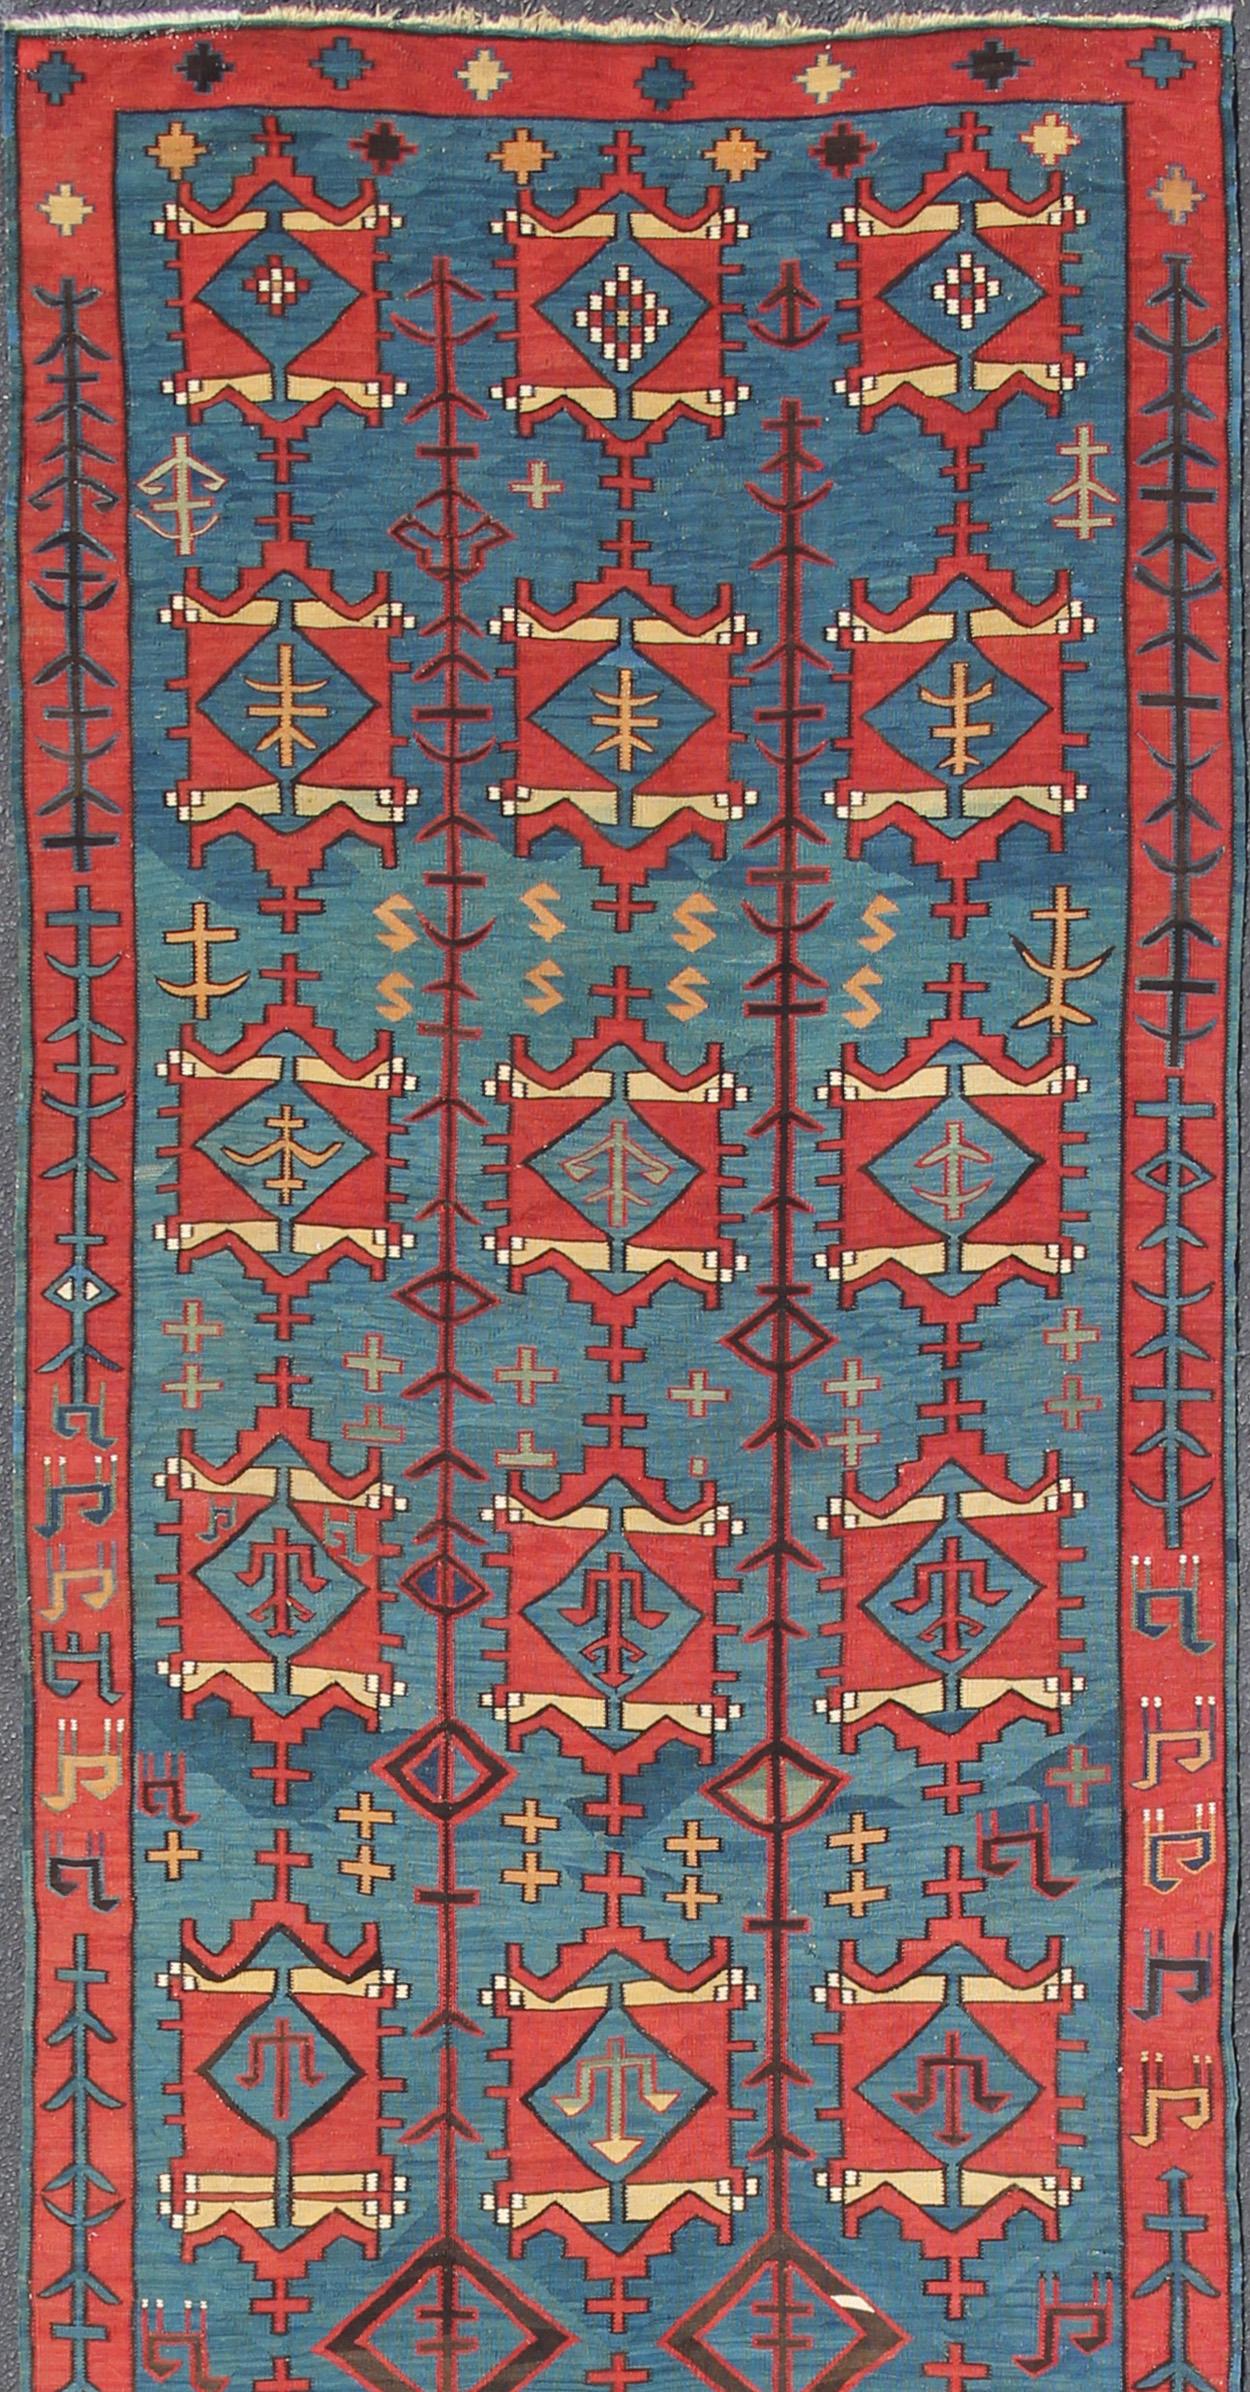 Amazing and rare antique Caucasian Avar tribal flat-weave Gallery size in blue and red, tribal Caucasian Kilim rug with all-over diamond and geometric design, rug R20-0301, country of origin / type: Caucasus / Kilim, circa 1900, Avar Caucasian,